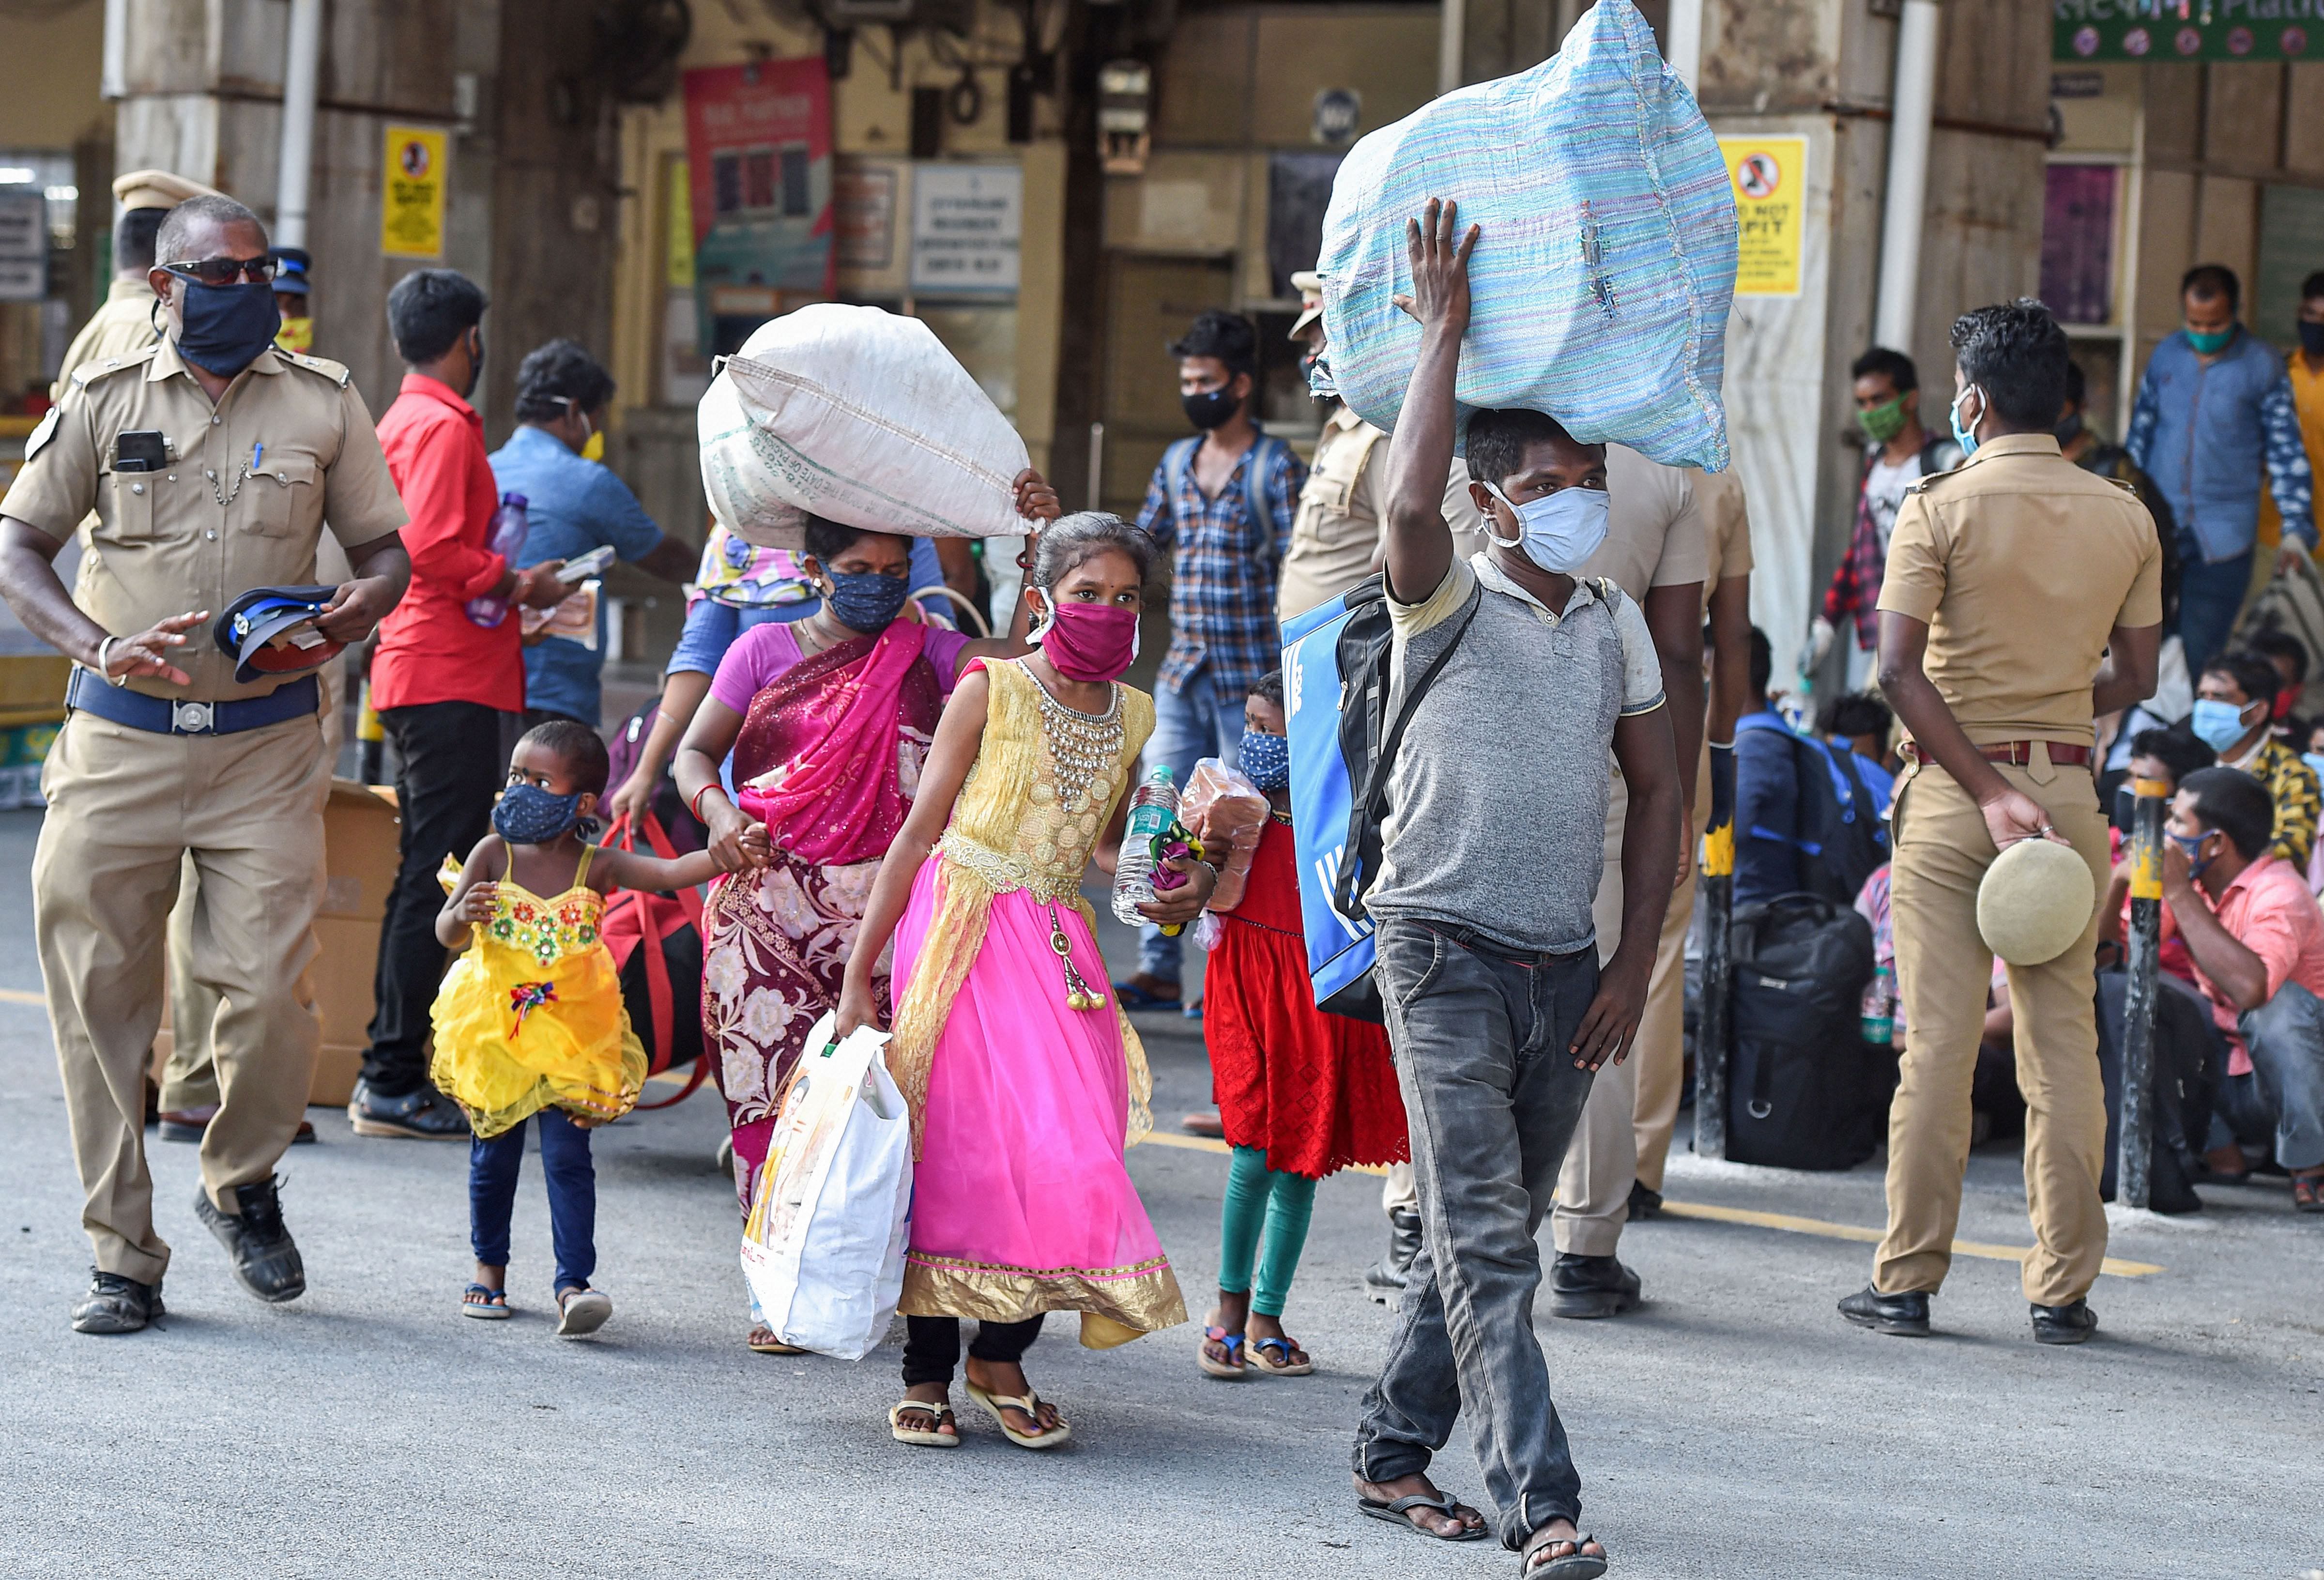 Migrants arrive at Central Railway Station to board a Shramik Special train for West Bengal, during ongoing COVID-19 lockdown, in Chennai. Credit: PTI Photo